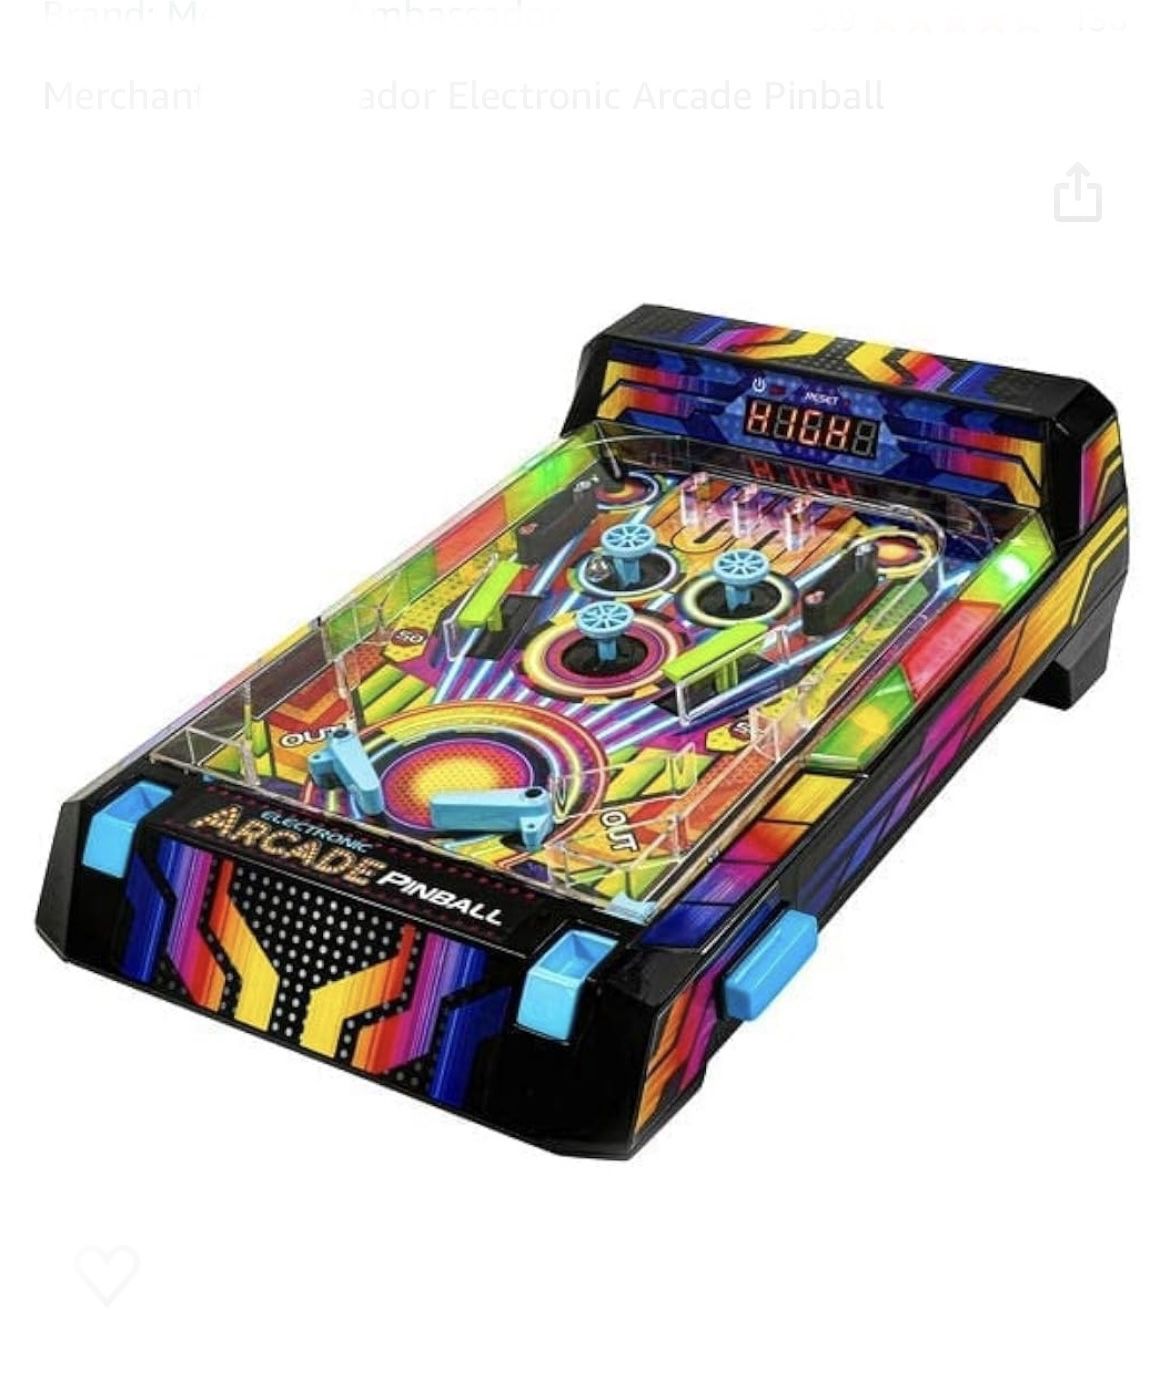 Arcade Pinball Machine Tabletop Electronic Brand New -Easter Present